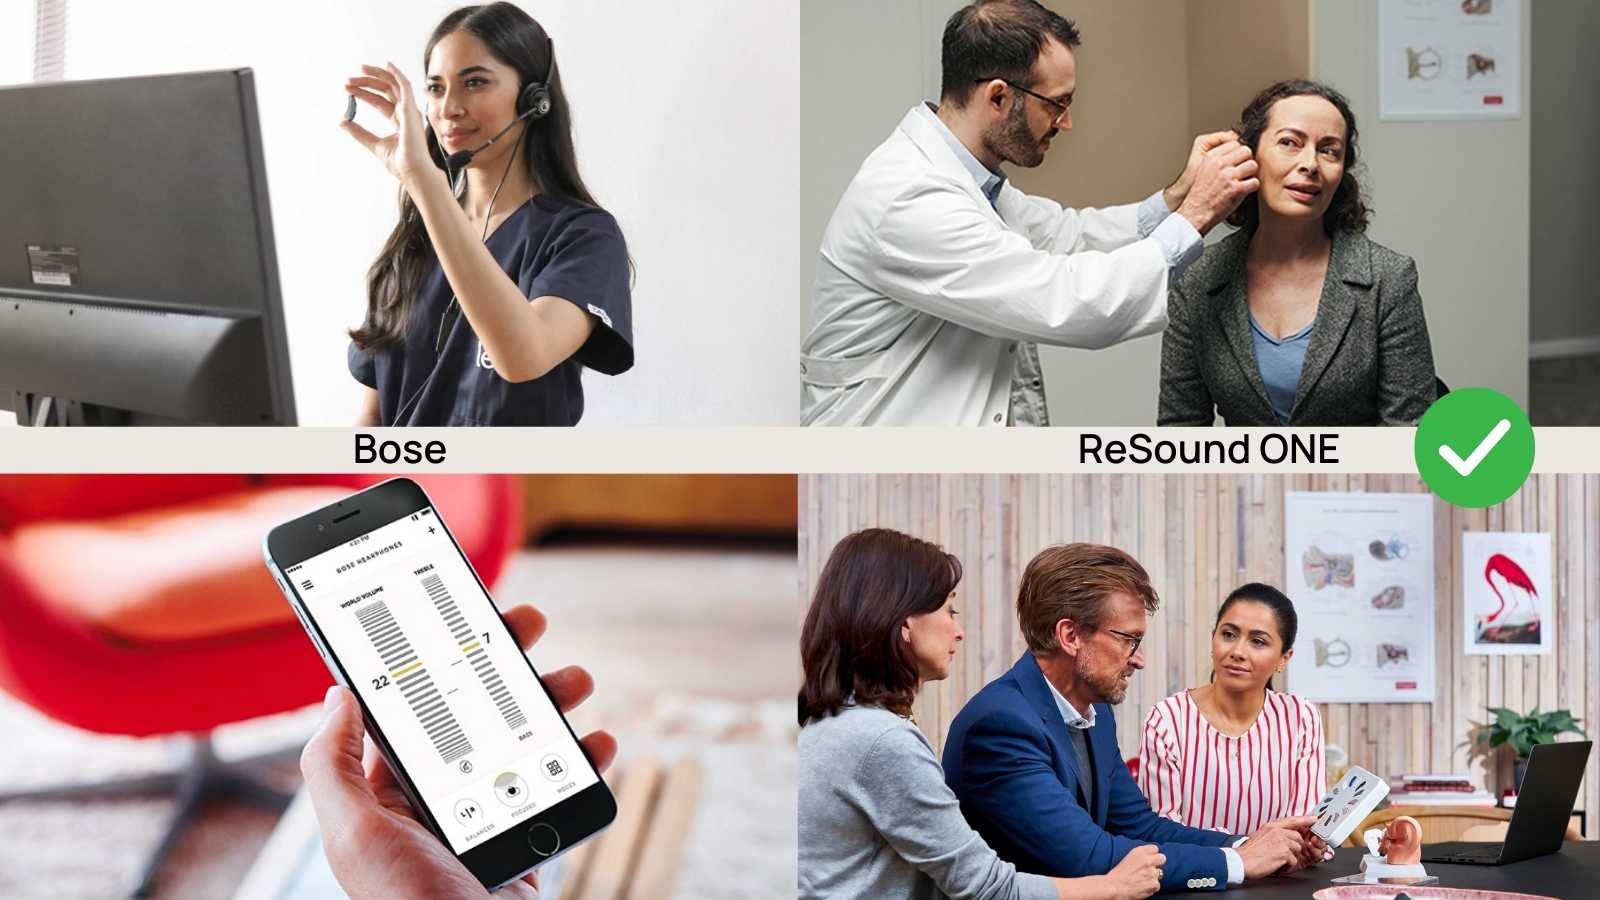 Image of Lexie care for Bose hearing aids and audiologists fitting ReSound hearing aids